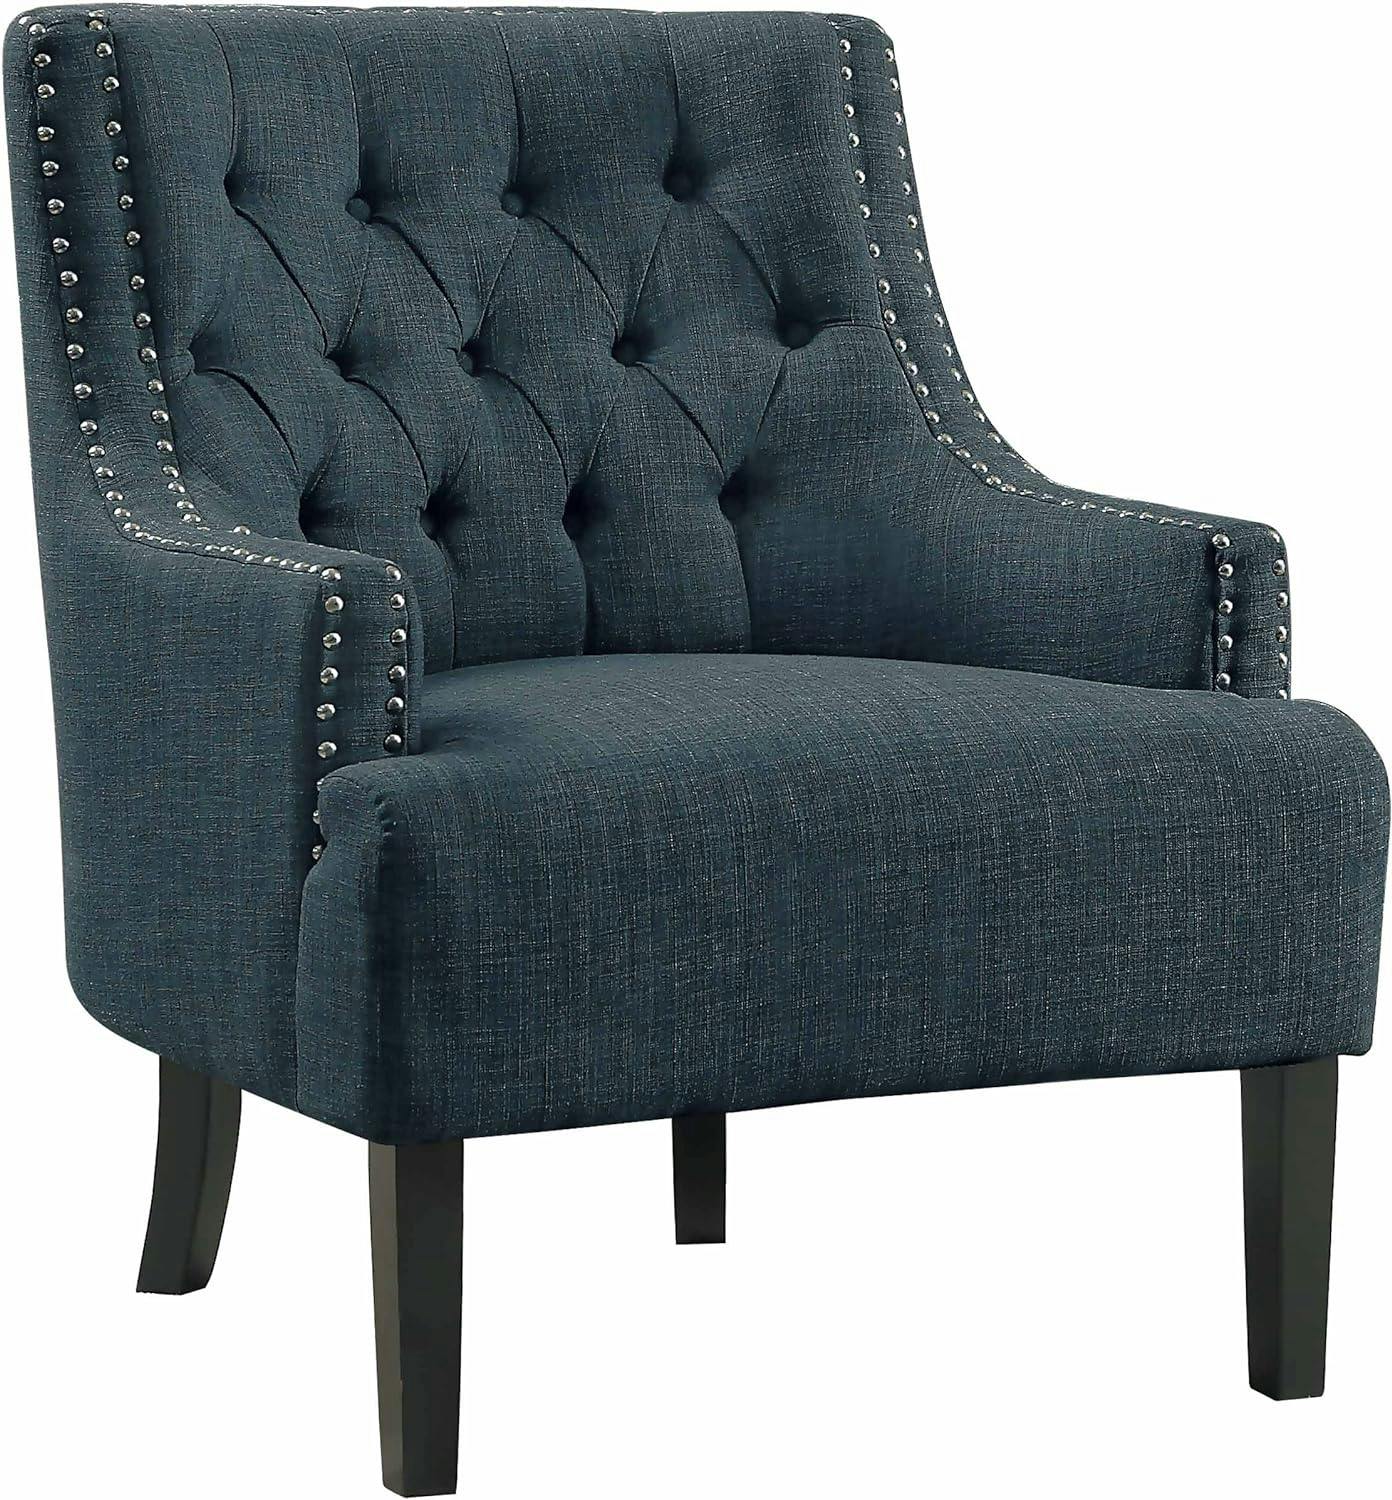 Indigo Transitional Accent Chair with Nailhead Trim and Tufted Back